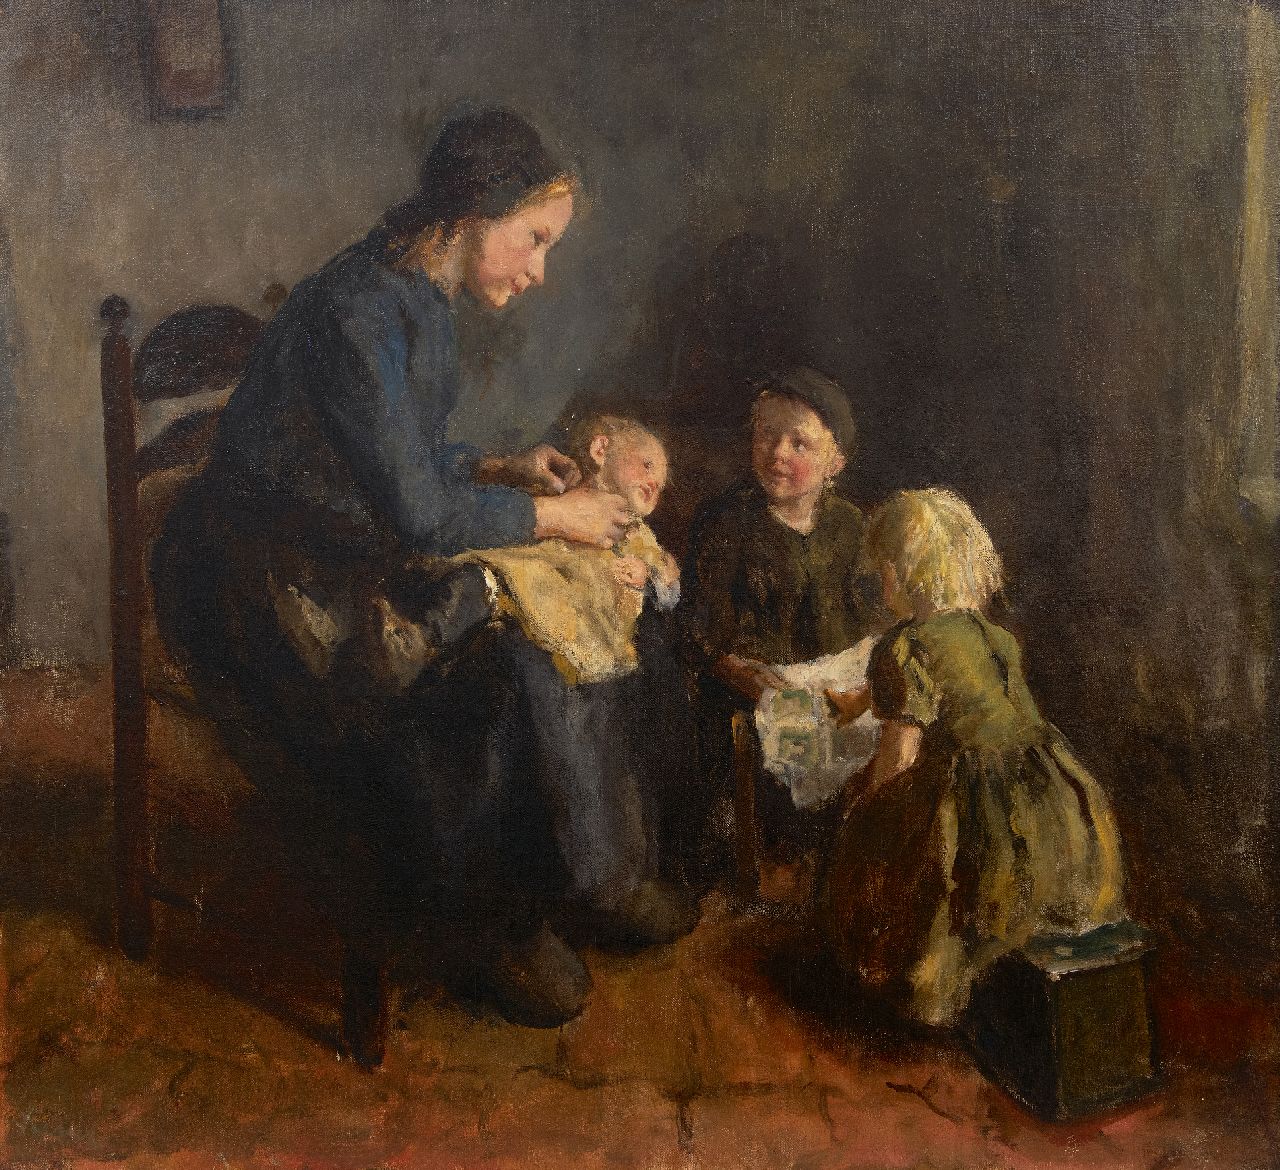 Kever J.S.H.  | Jacob Simon Hendrik 'Hein' Kever, A farm interior with a mother and her children, oil on canvas laid down on board 76.1 x 82.9 cm, signed l.l.